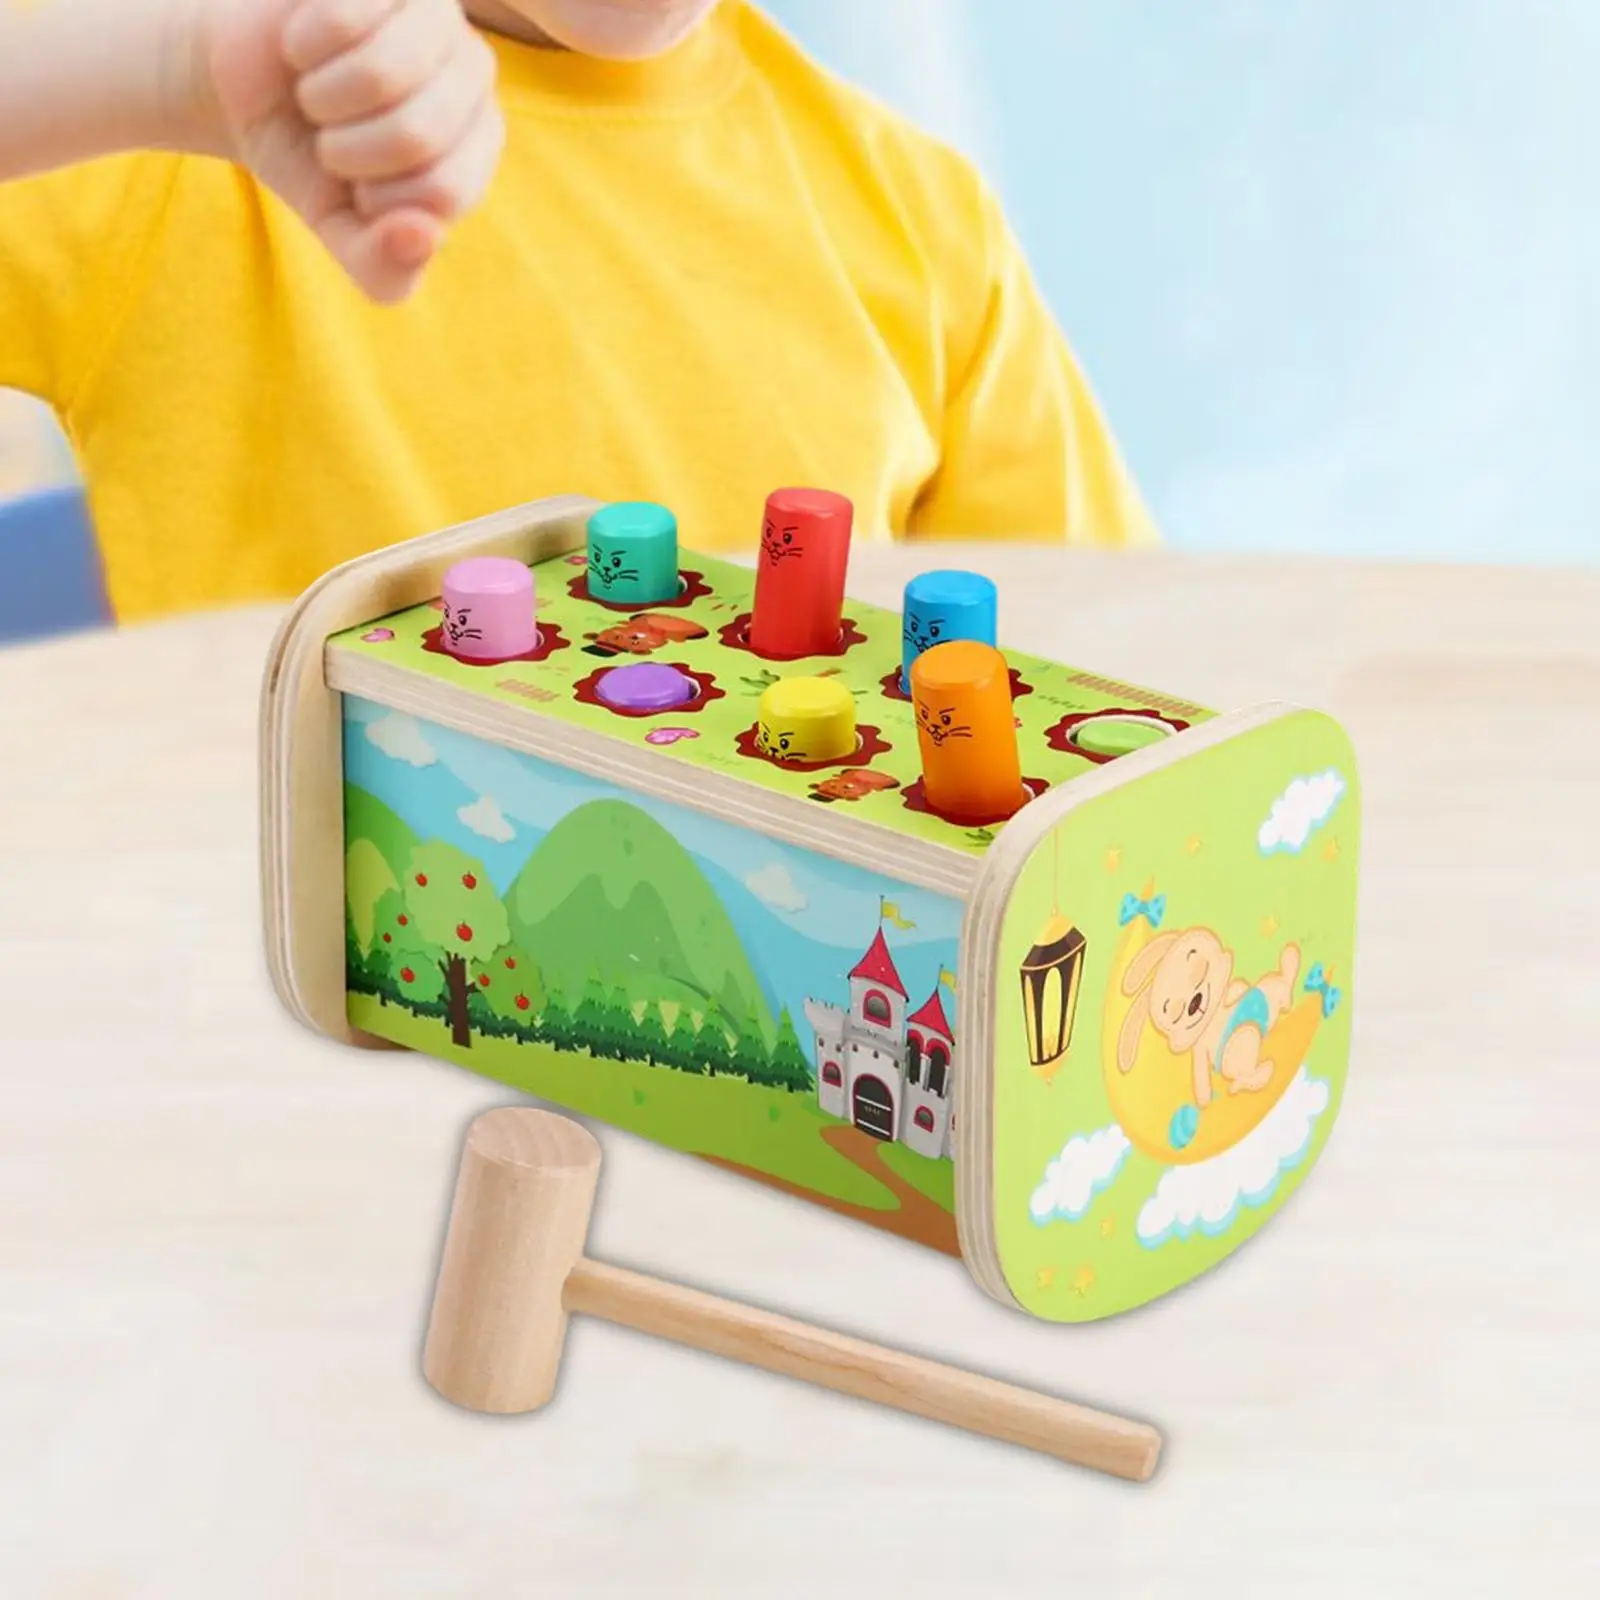 Fun Wooden Hammering Pounding Toys Fine Motor Early Learning Educational Toys for Girls Boys Kids Infant Toddler Birthday Gifts